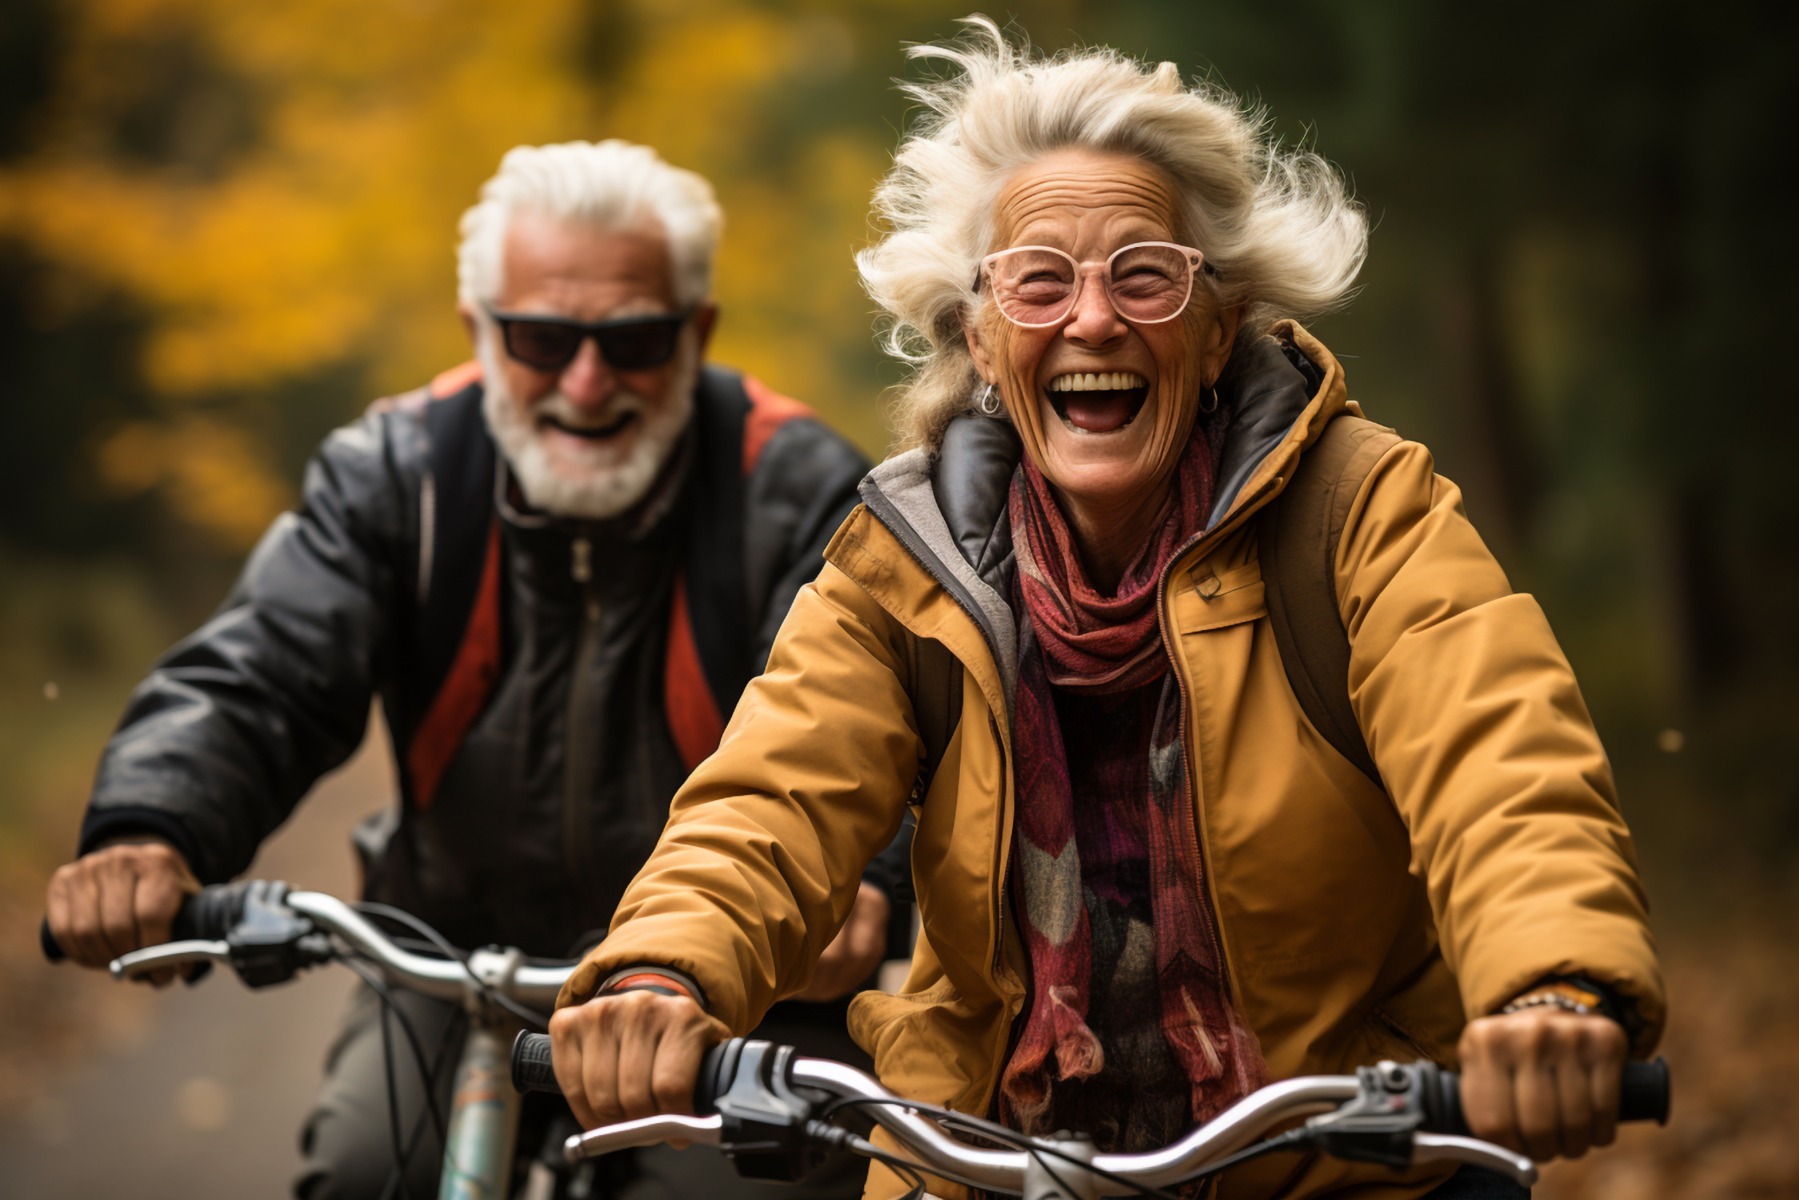 Man and woman smiling cycling